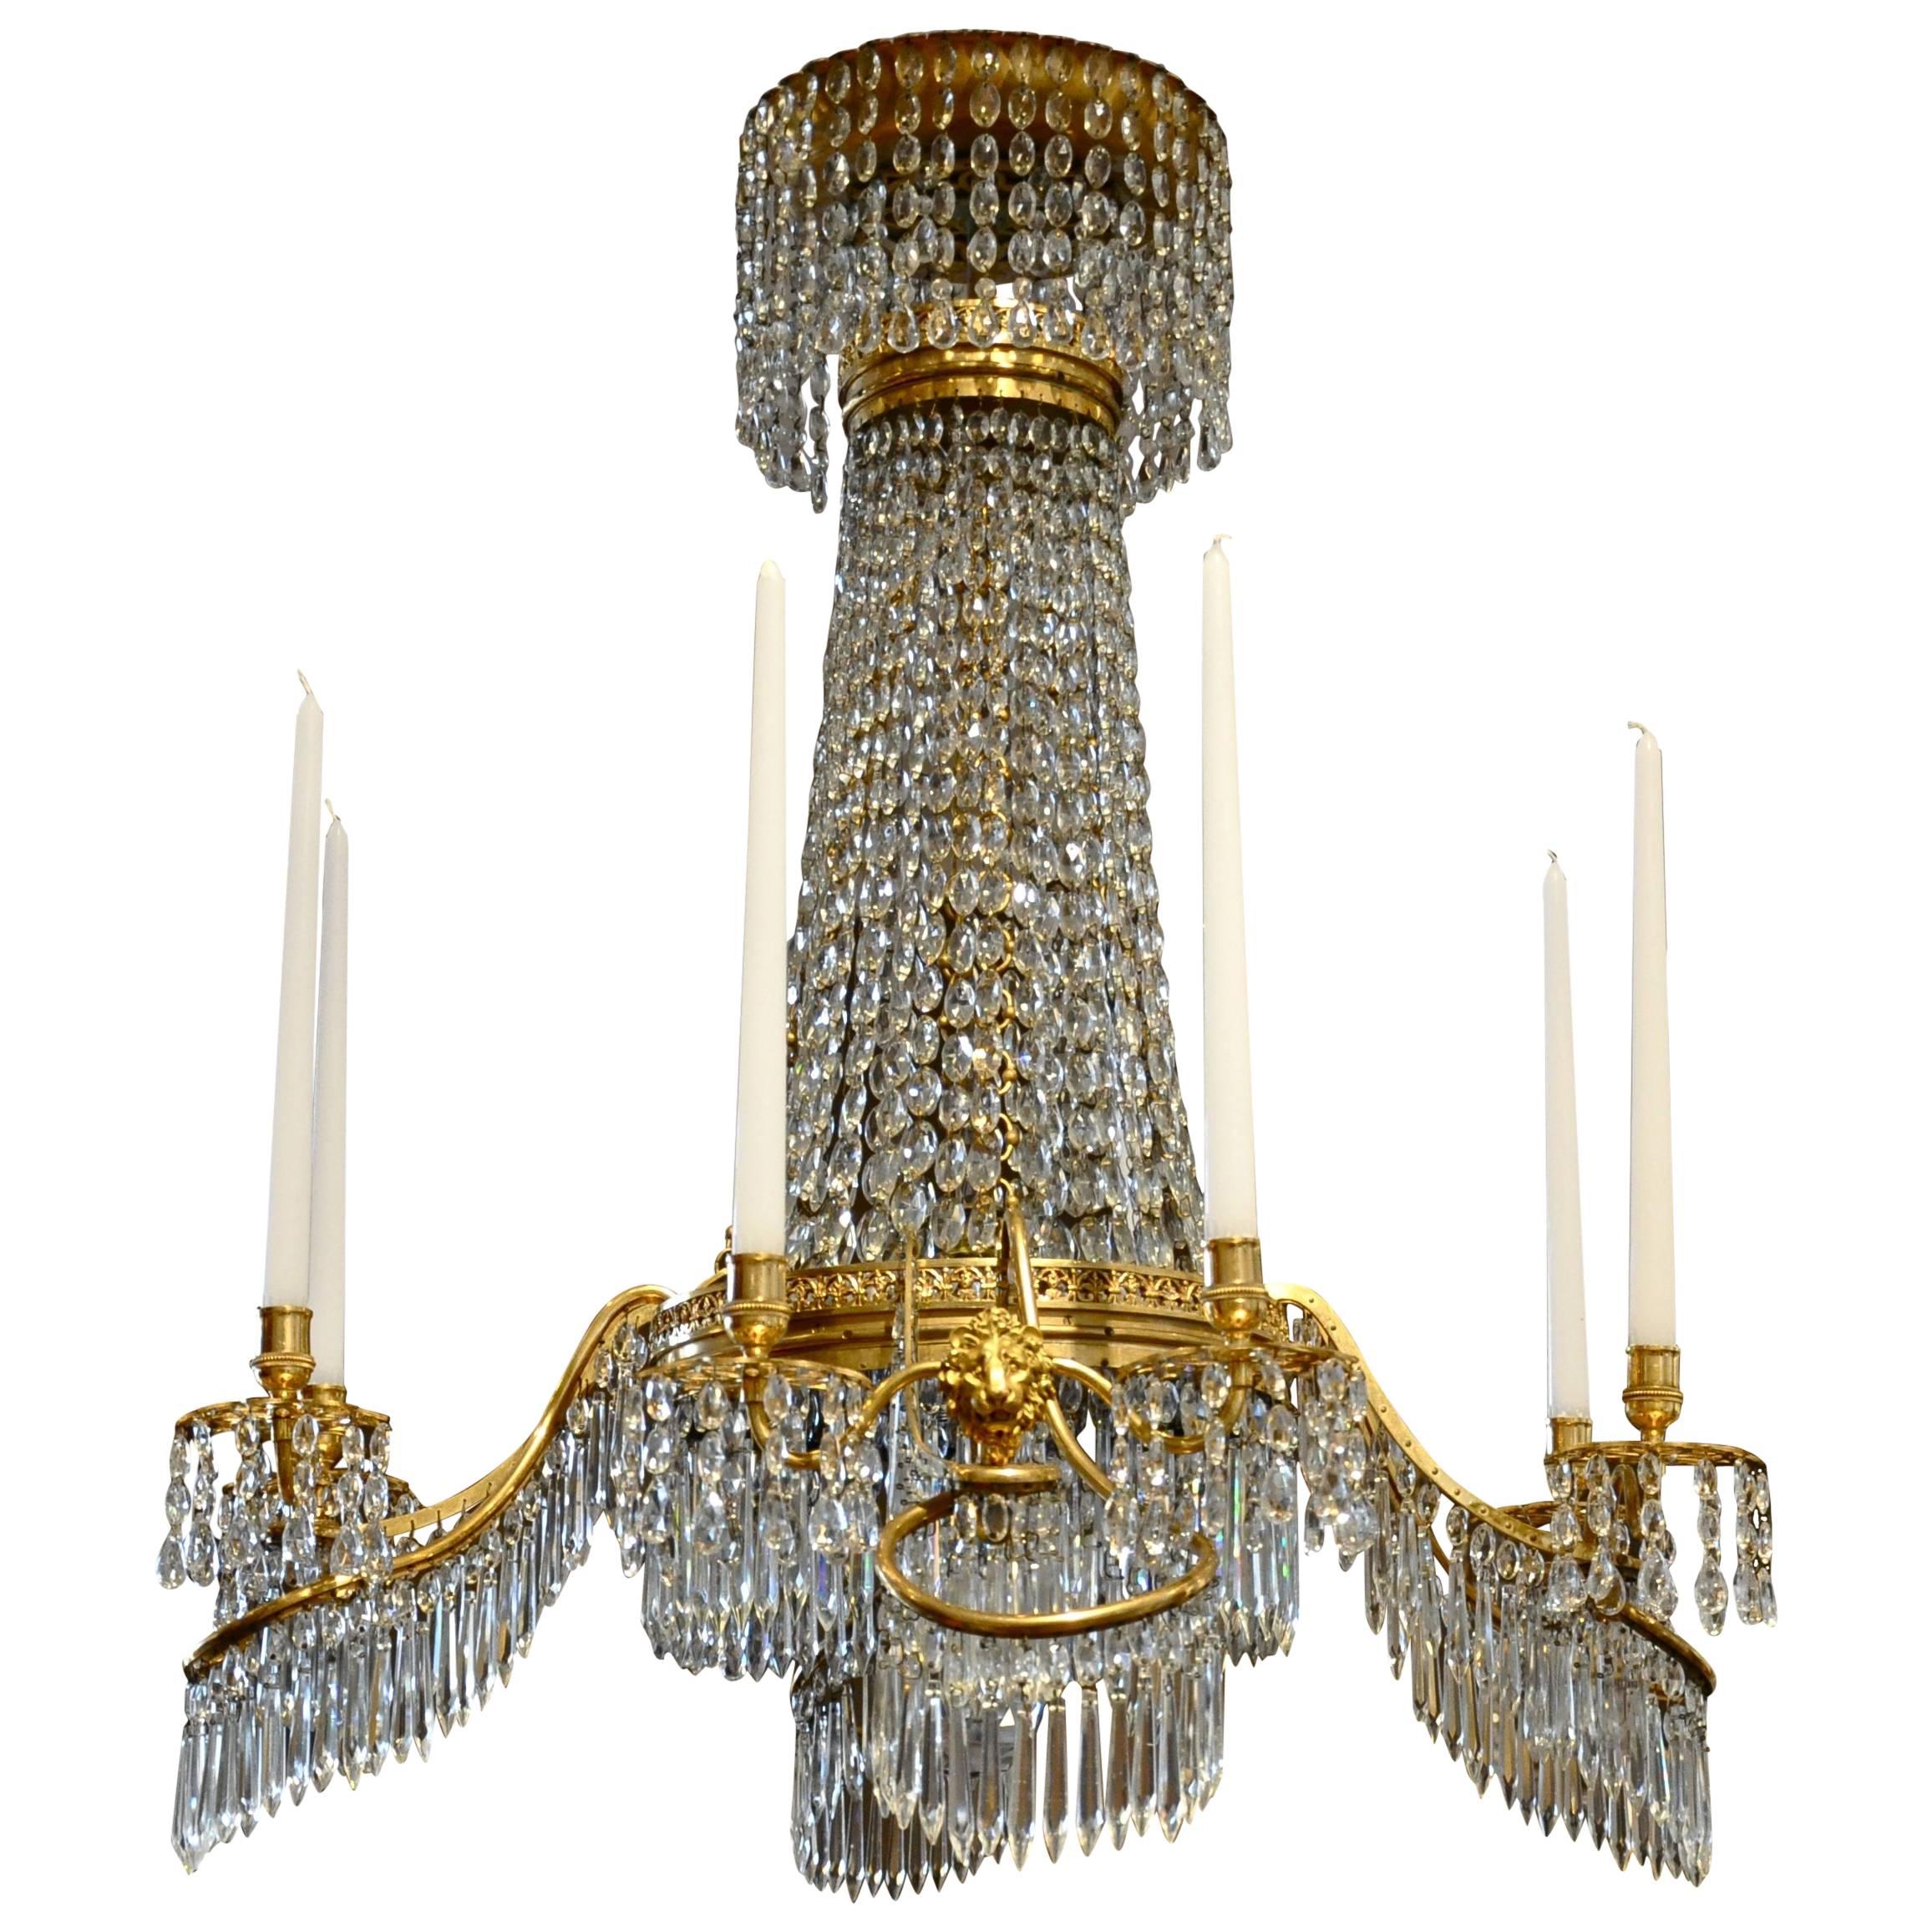  Early 19th Century German Gilt Bronze Neoclassical Chandelier, Werner and Mieth